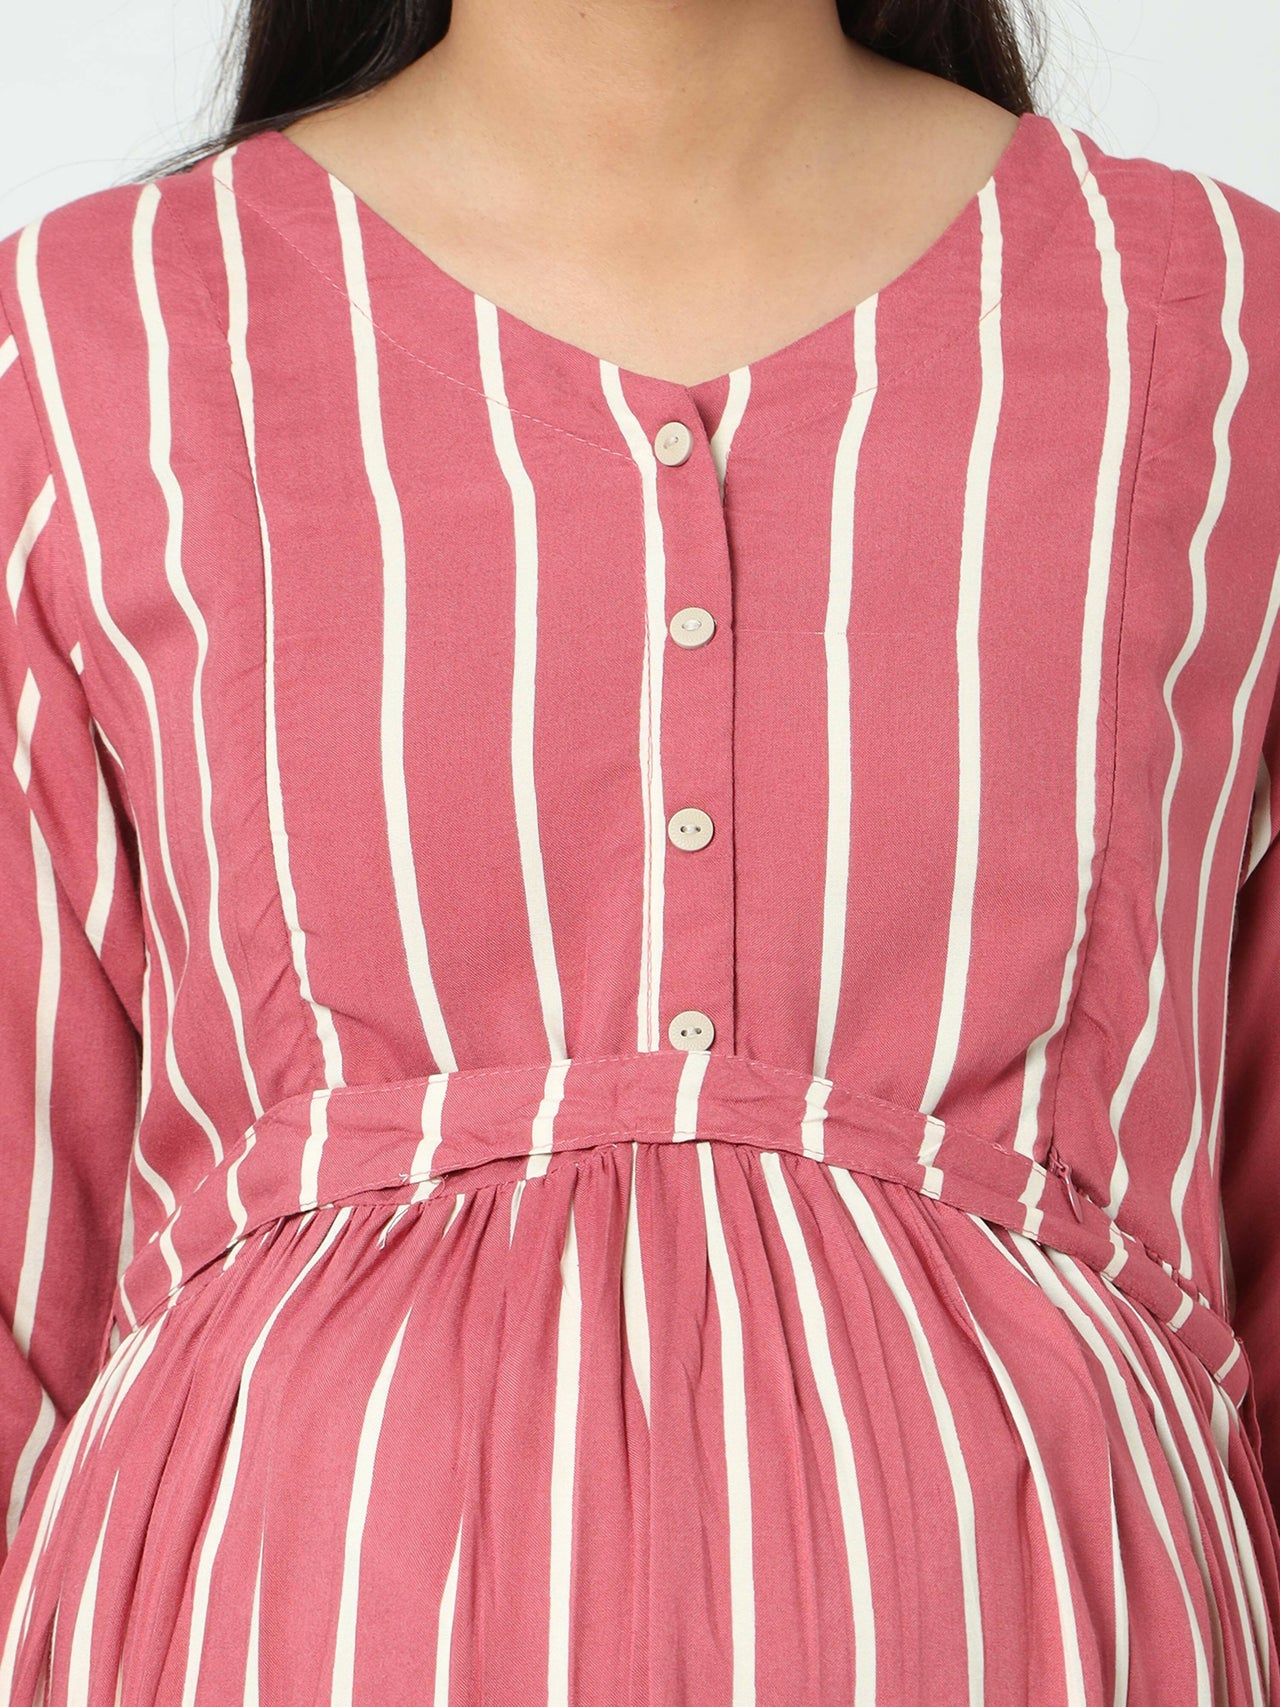 Manet Three Fourth Maternity Dress Striped With Concealed Zipper Nursing Access - Pink - Distacart